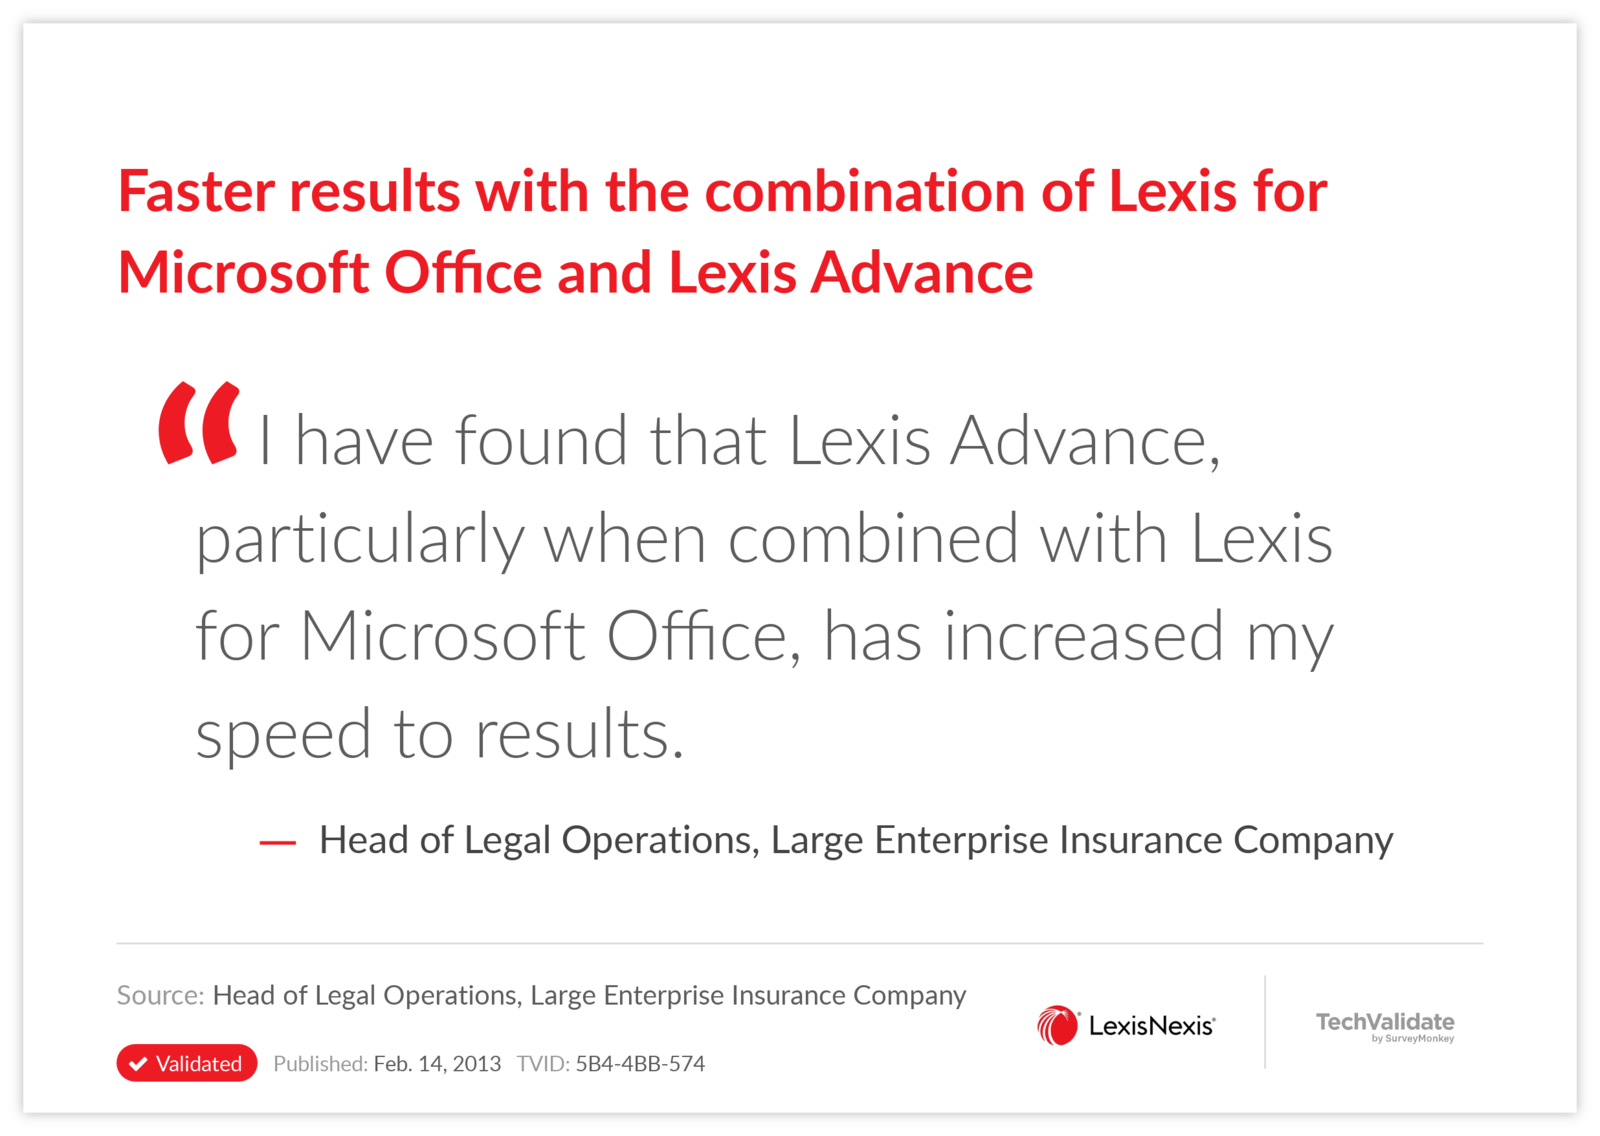 Faster results with the combination of Lexis for Microsoft Office and Lexis Advance